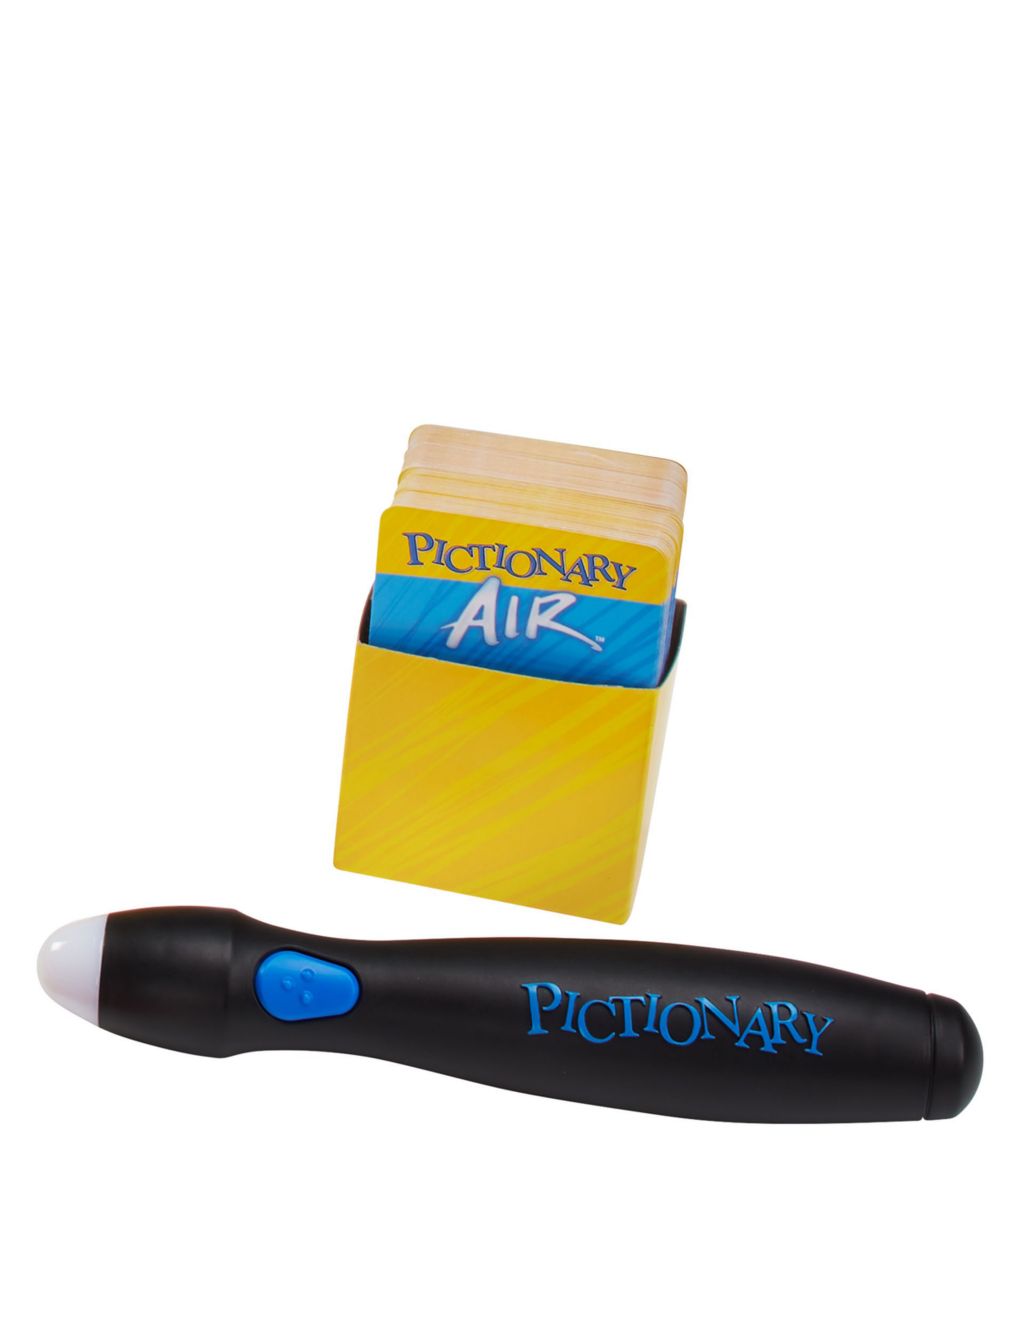 Pictionary Air 2.0 Game